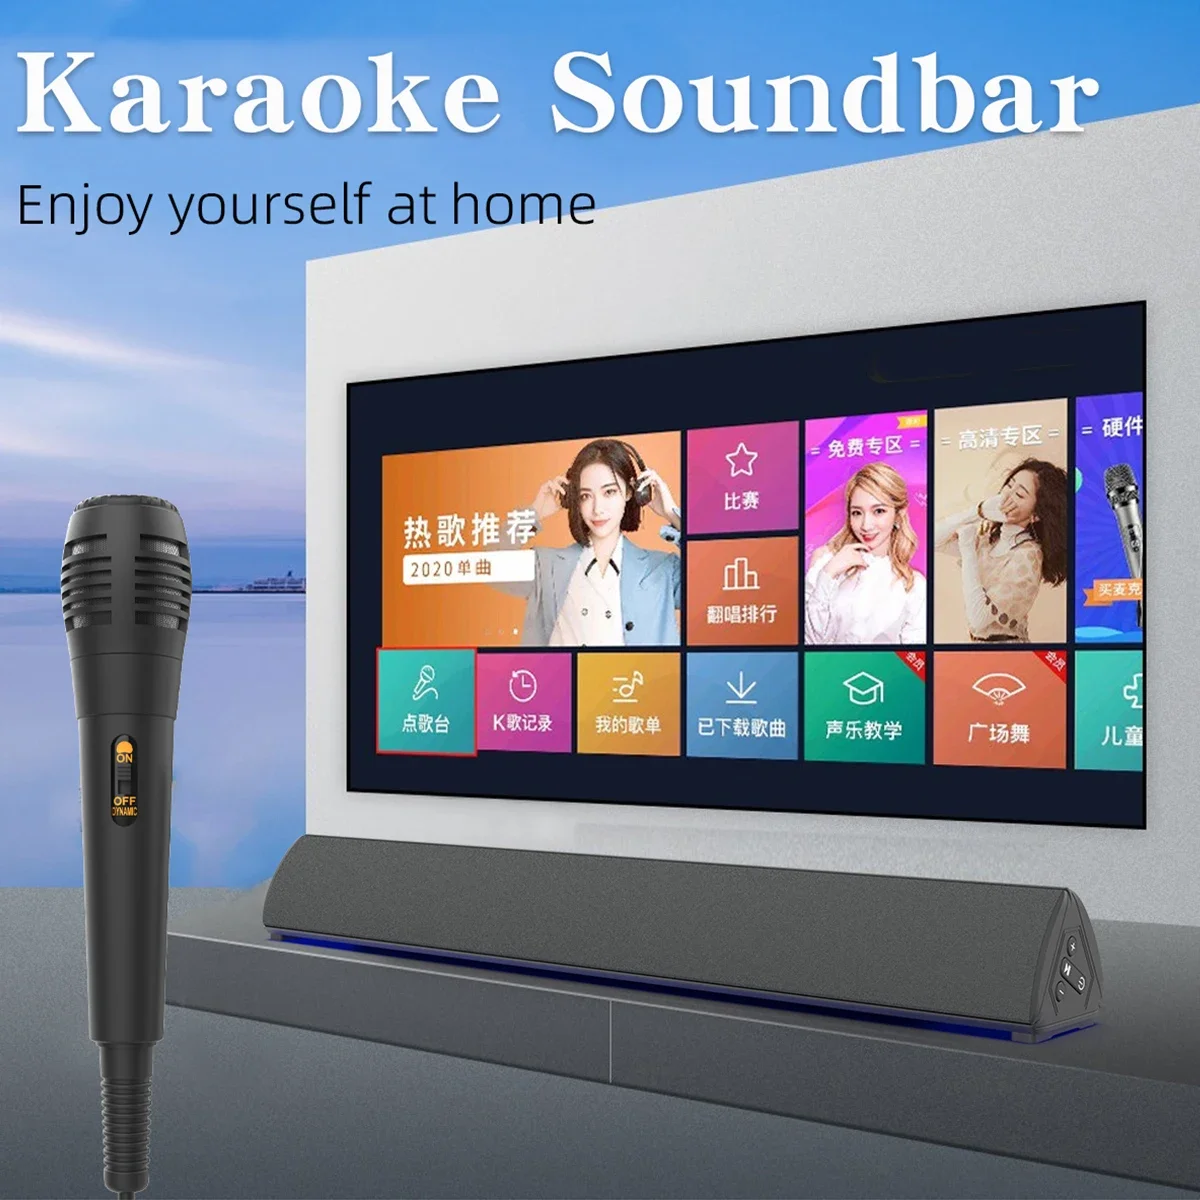 

40W Wireless TV Soundbar with Microphone Home Sound System 3D Subwoofer Surround Soundbar Support USB Drive for PC TV Speakers